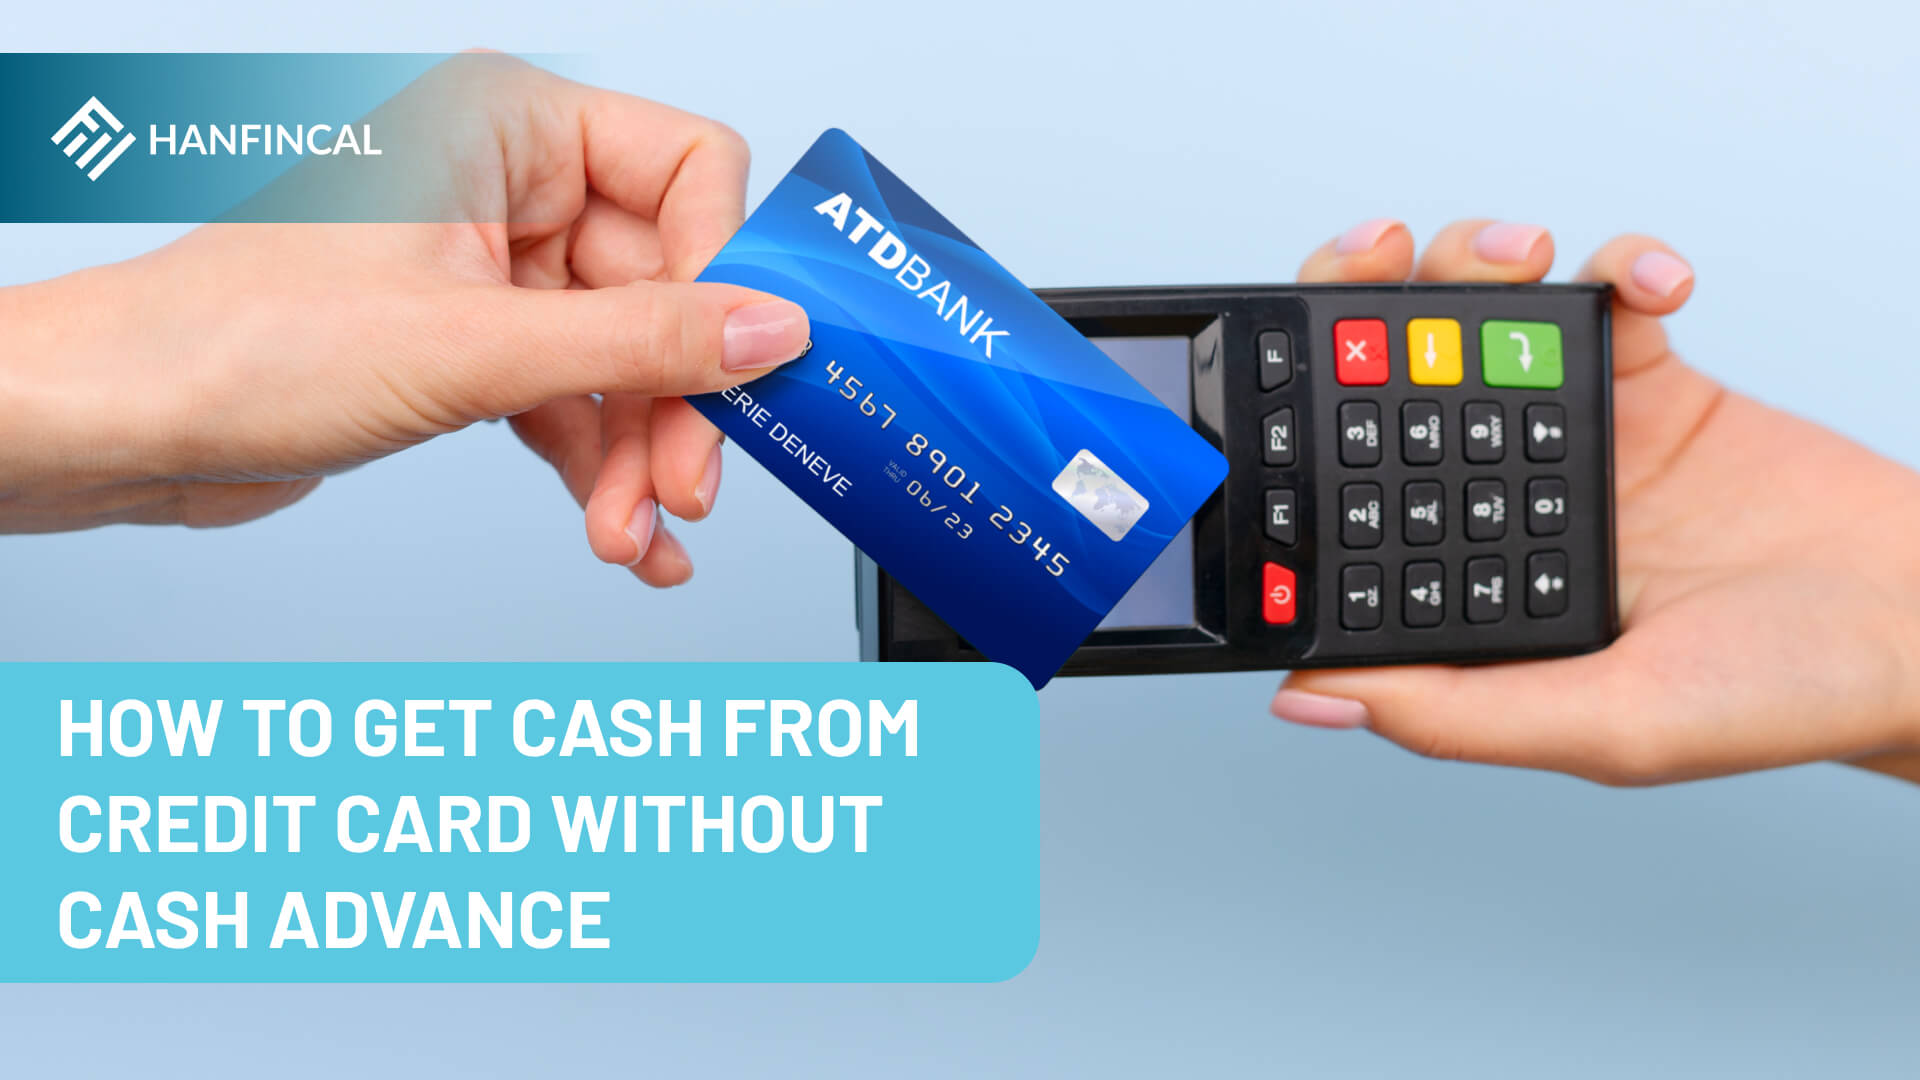 How to get cash from credit card without cash advance?